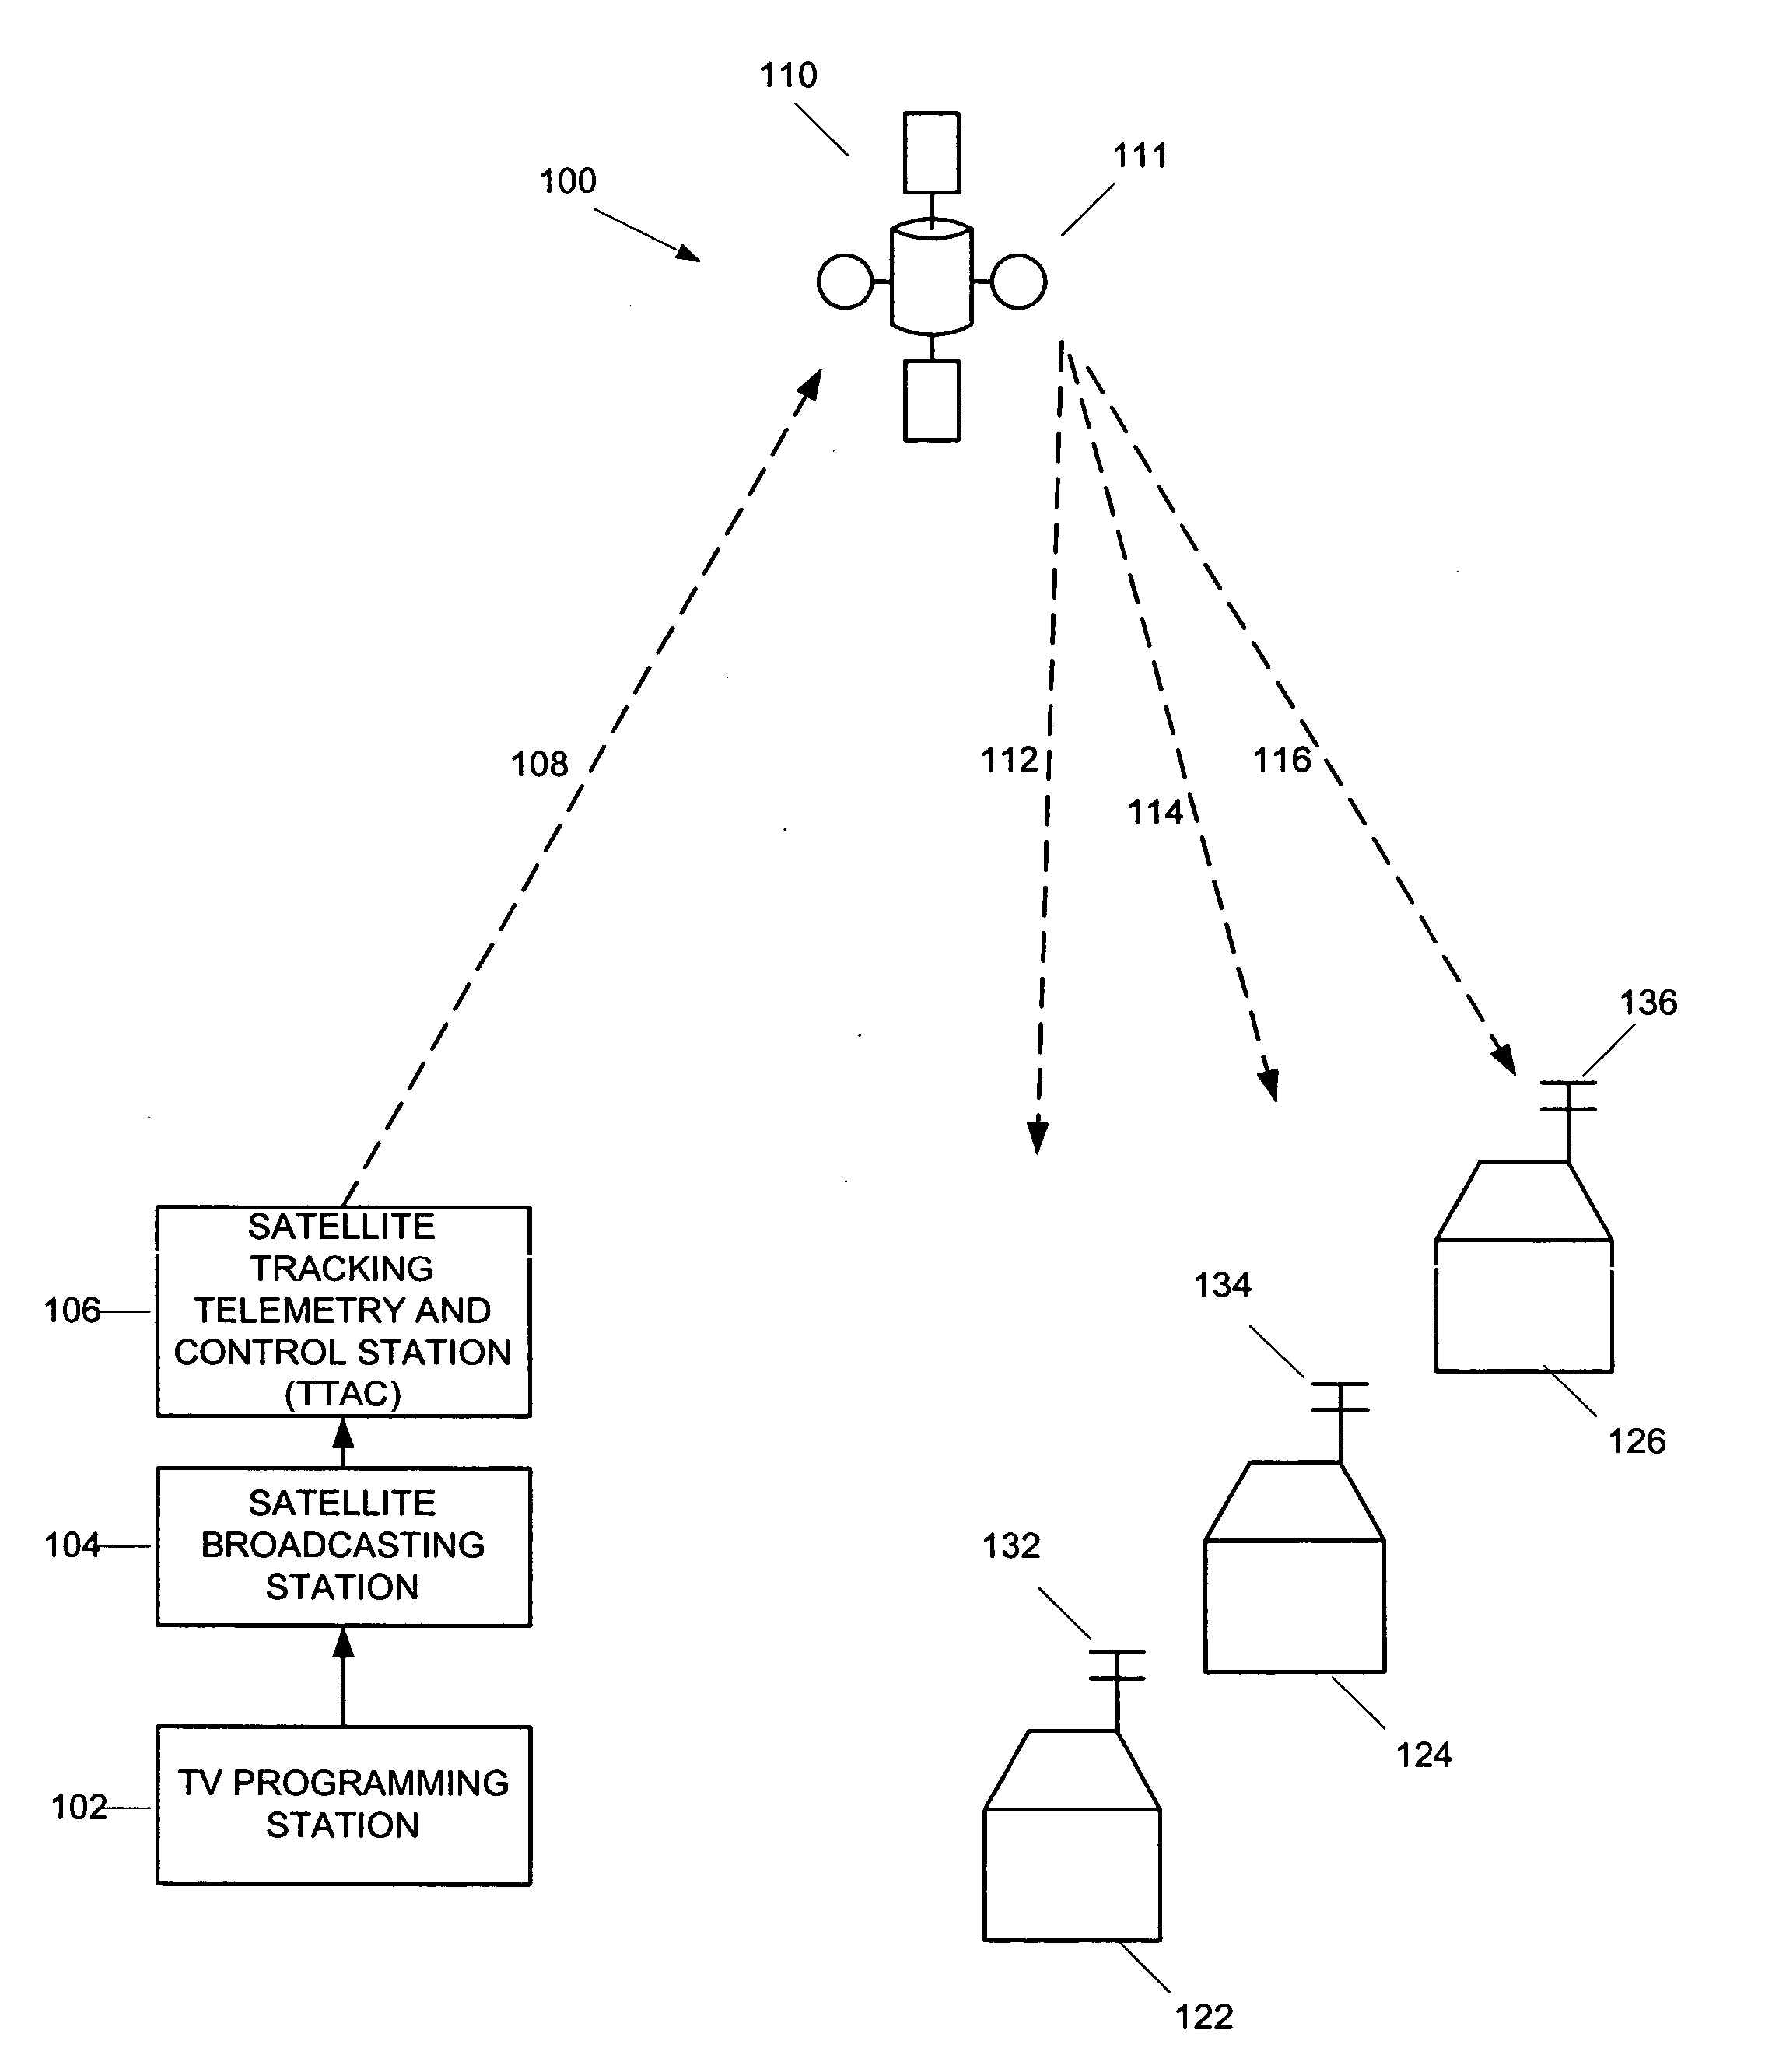 Method of using feedback from consumer terminals to adaptively control a satellite system